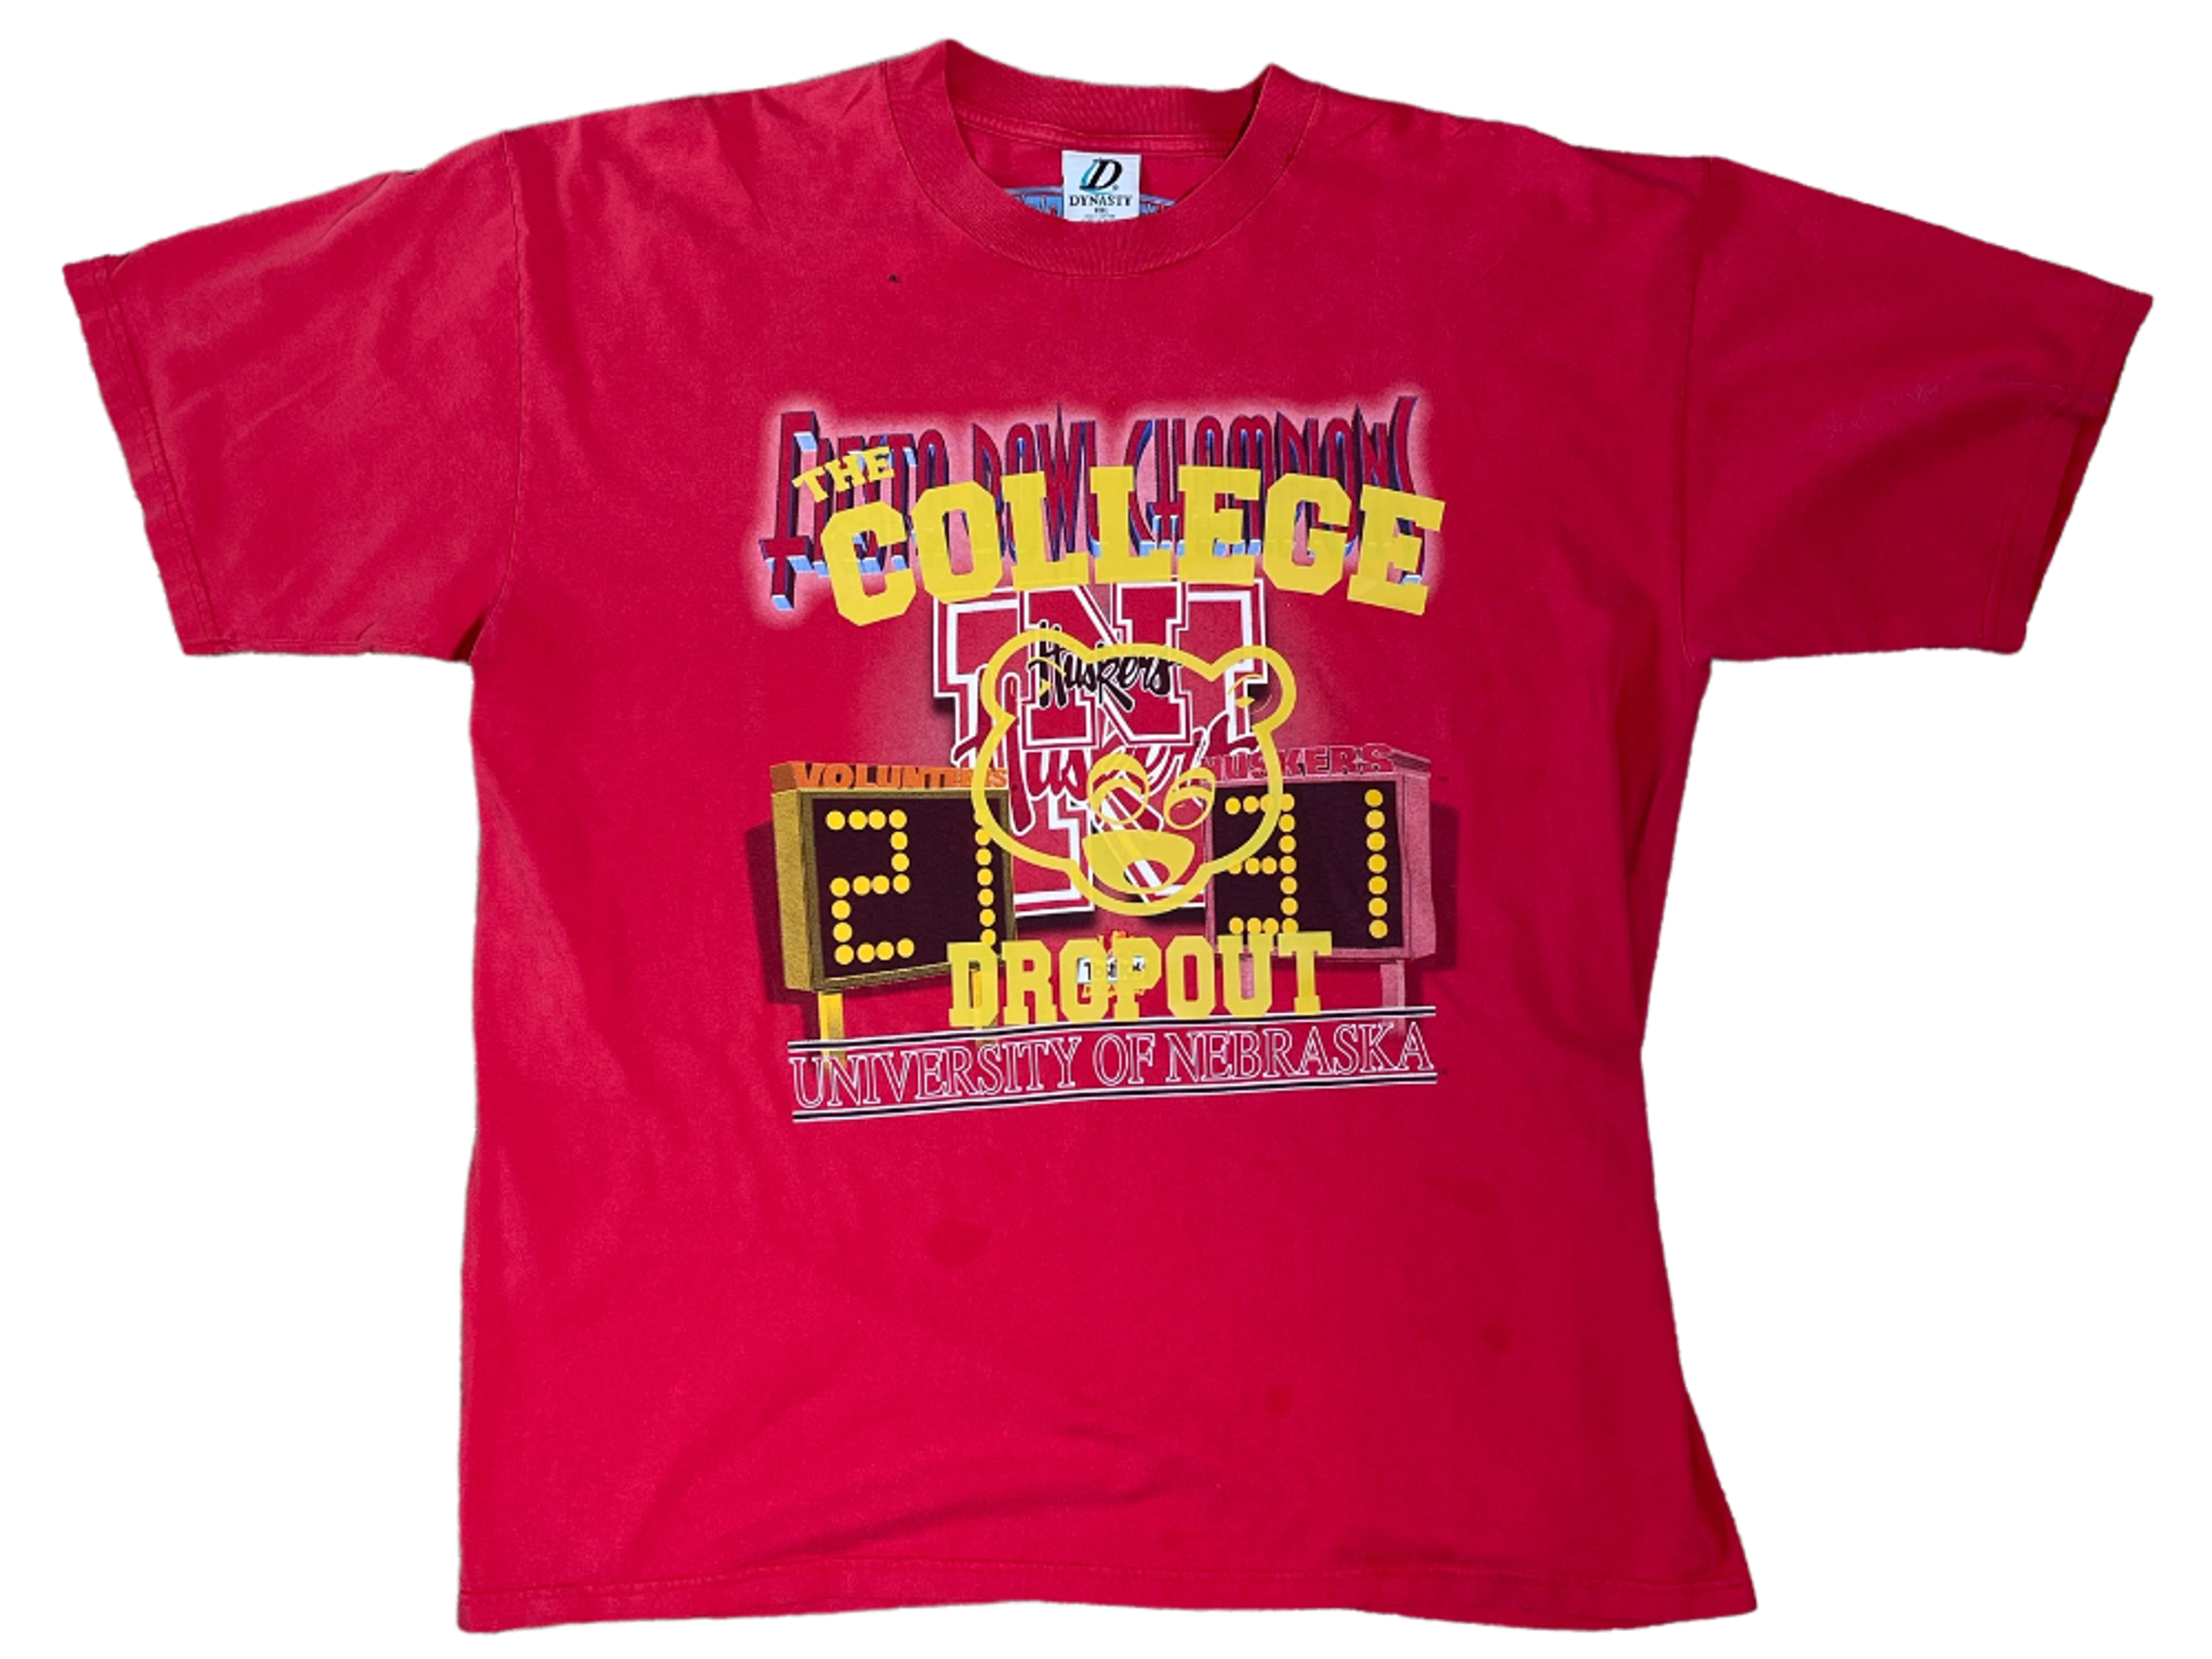 VINTAGE COLLEGE DROPOUT HUSKERS TEE